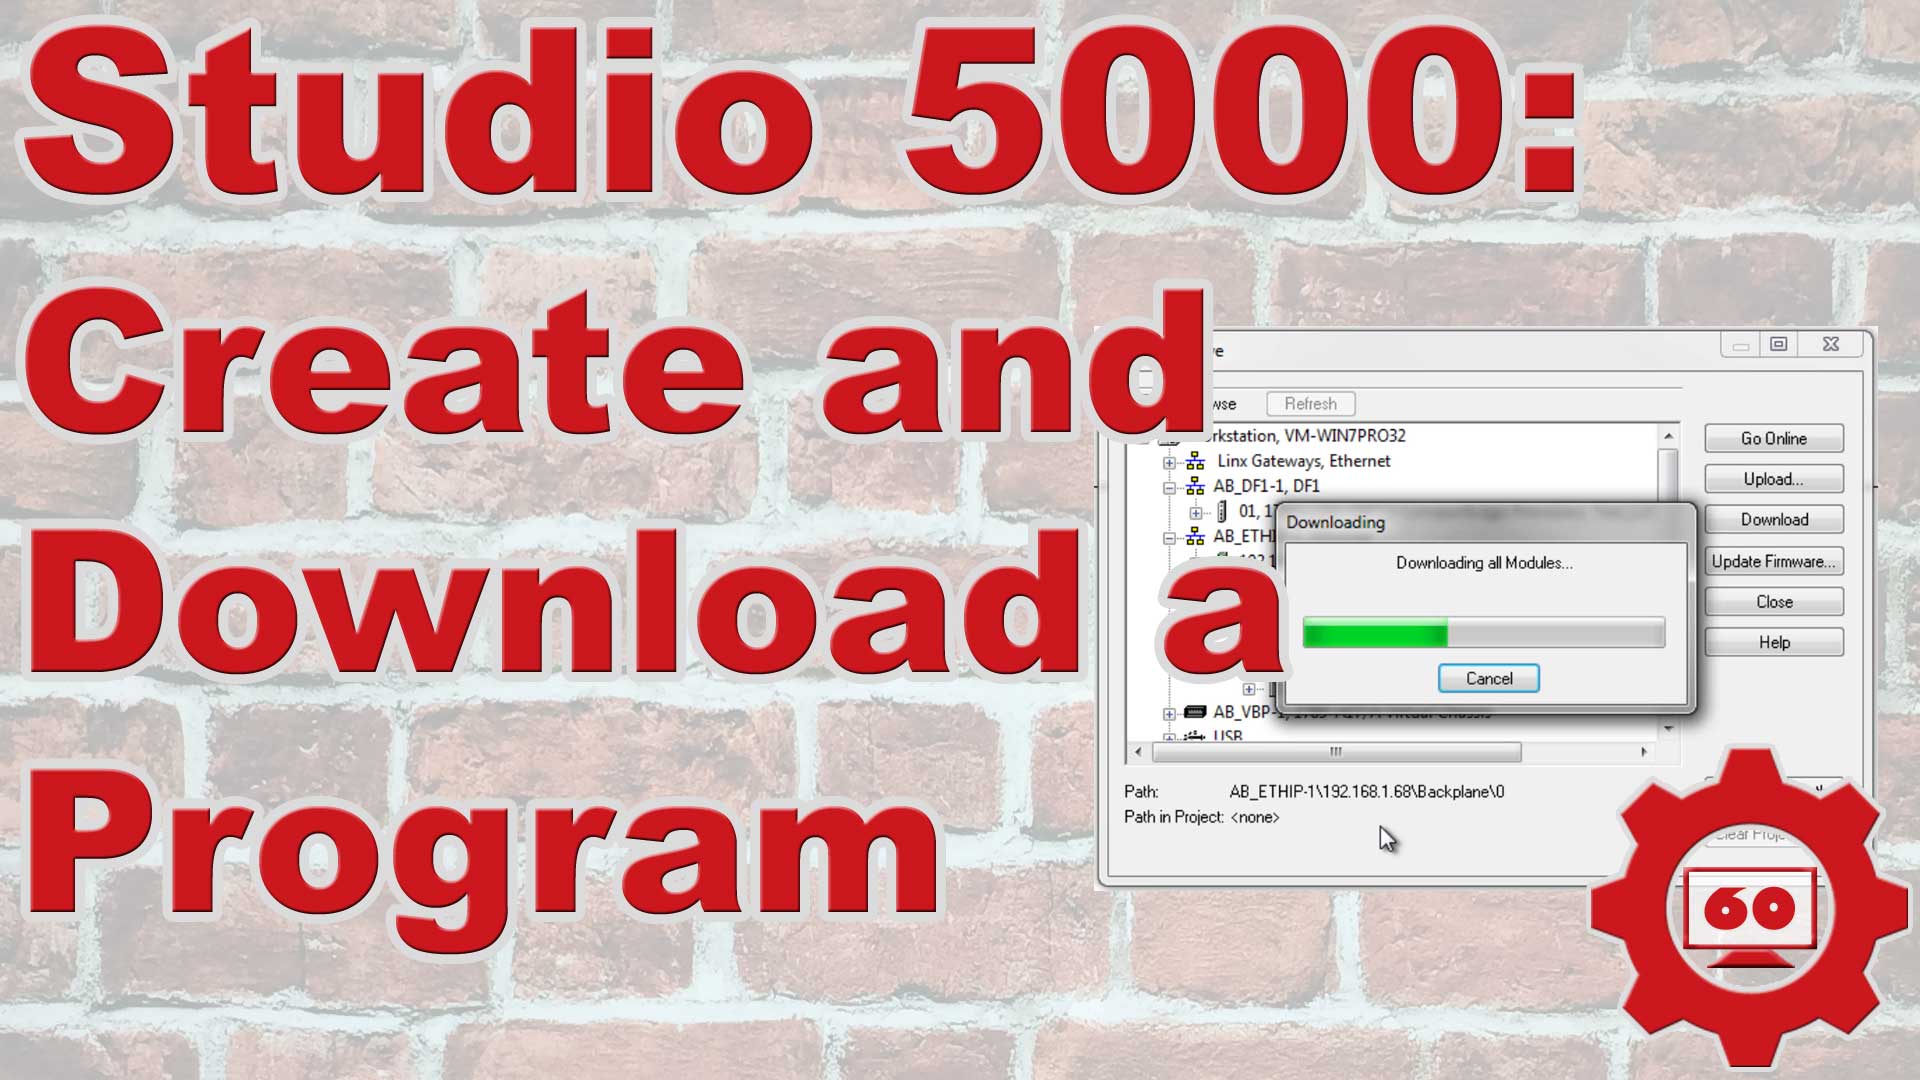 Studio 5000 - How to create and download a program (M2E20)